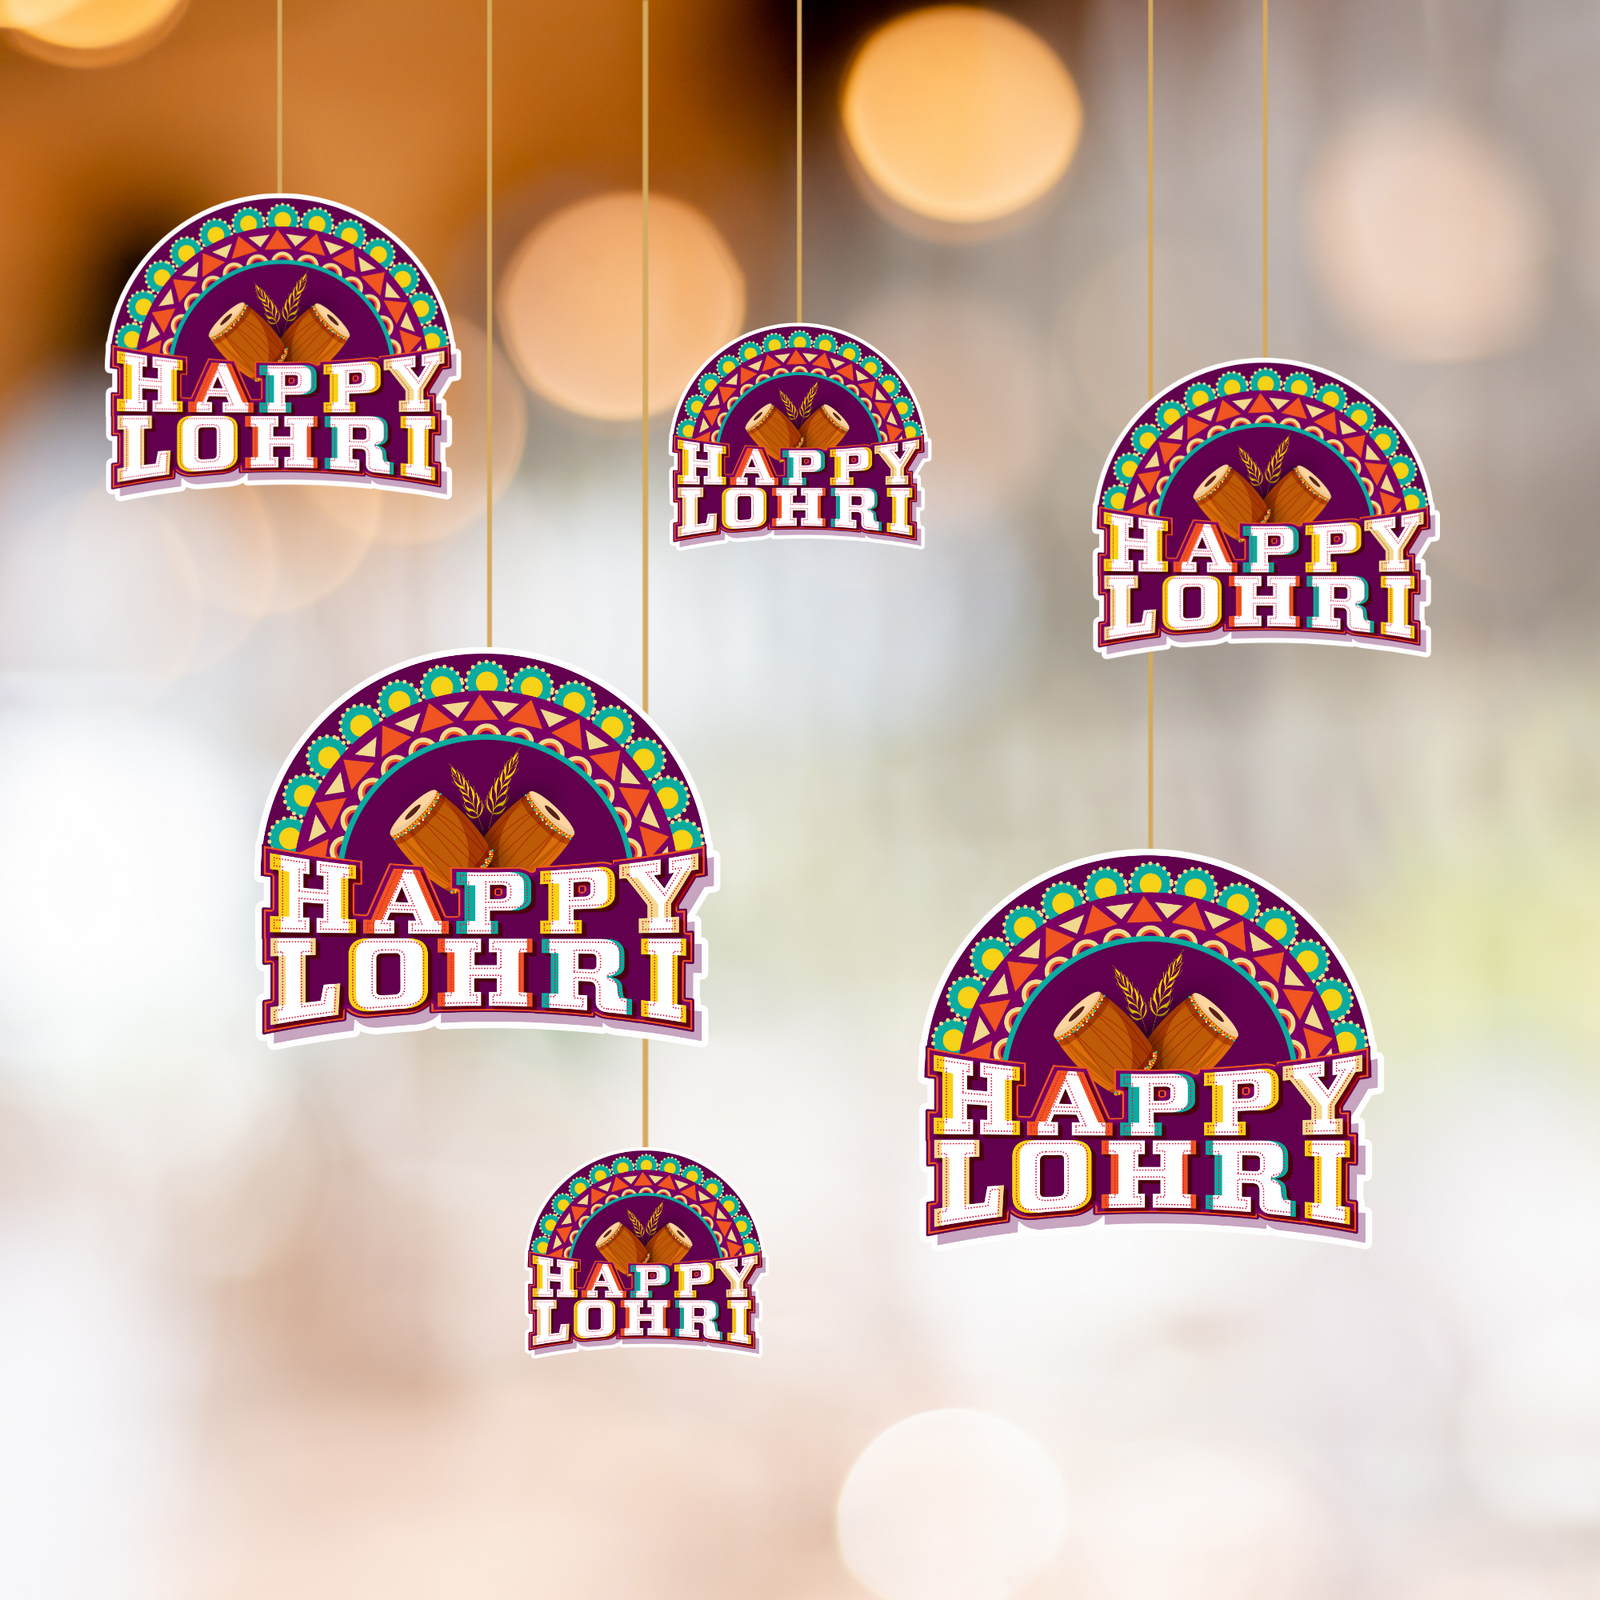 Lohri Dangler/Bunting (6 Inches/250 GSM Cardstock/Multicolor/10 Pieces, Front/Back)